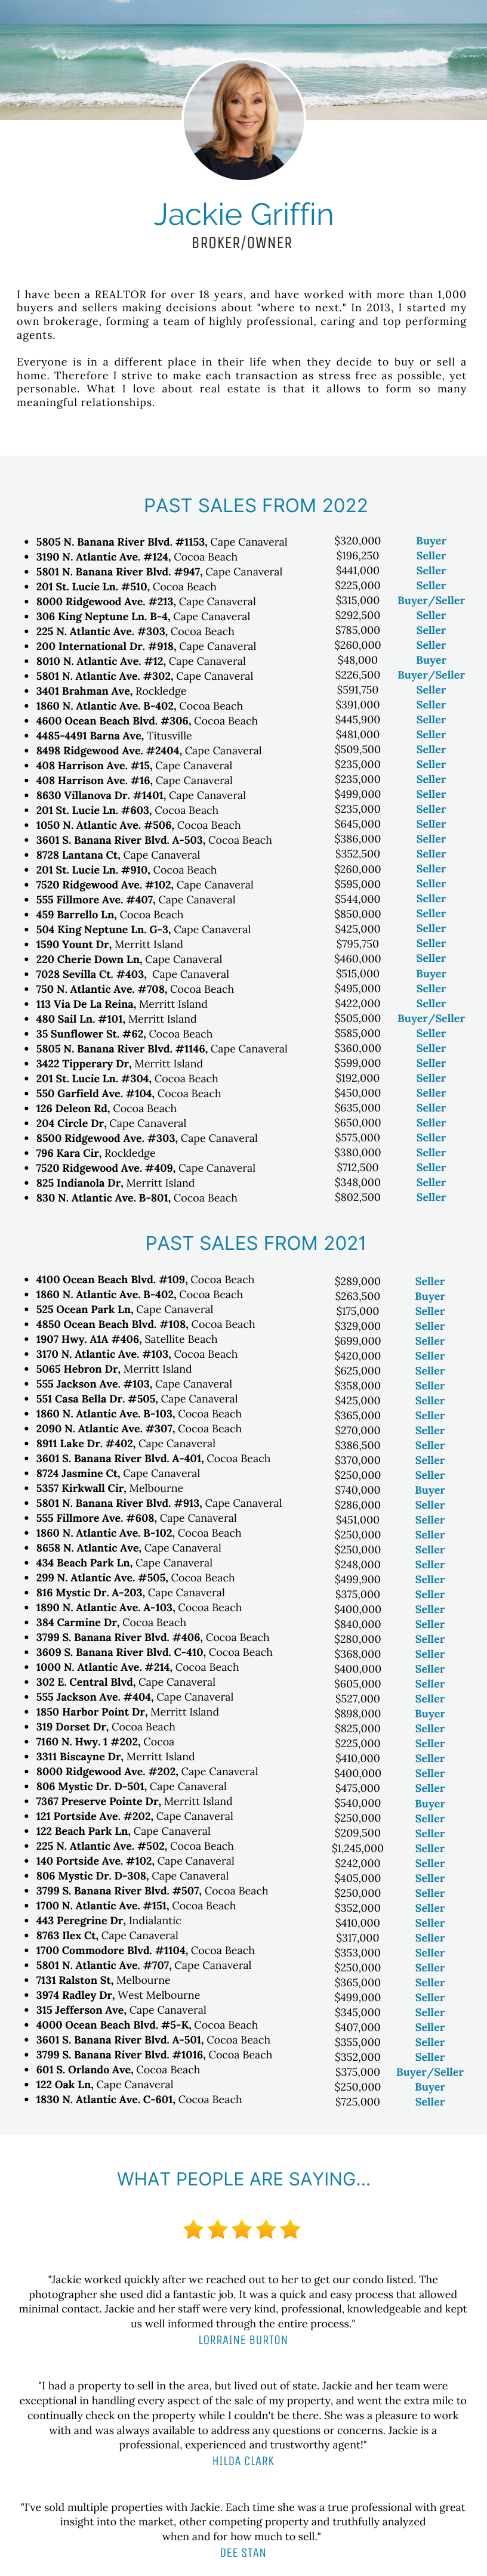 Individual Sales for Website (8.5 x 25 in) (8.5 x 30 in) (8.5 x 30 in).png